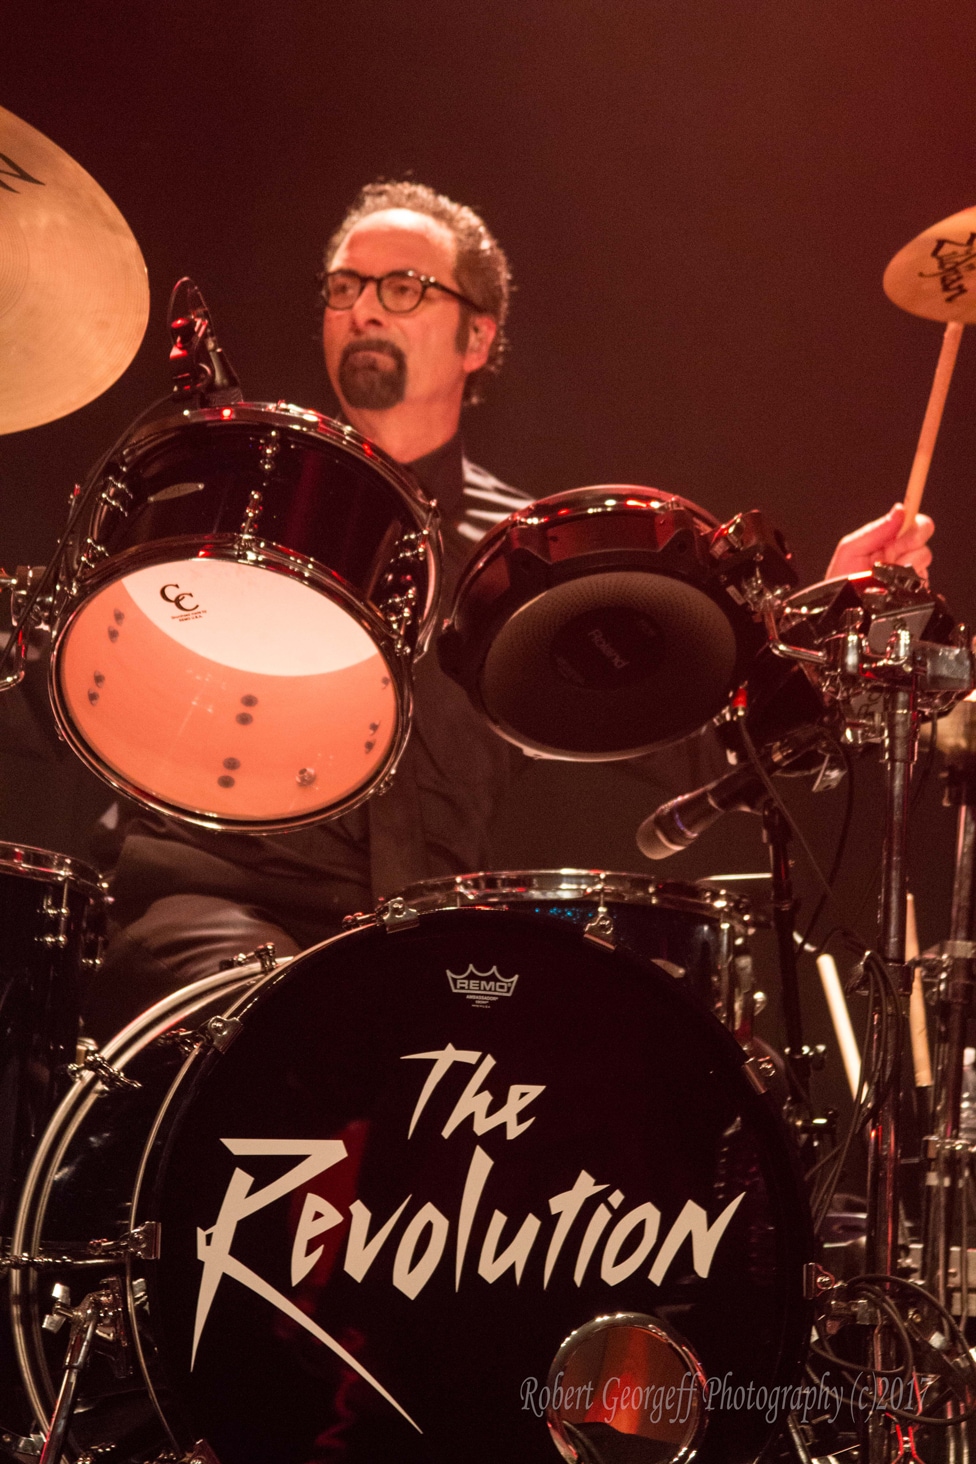 Bobby Z of The Revolution behind the drum kit by Robert Georgeff